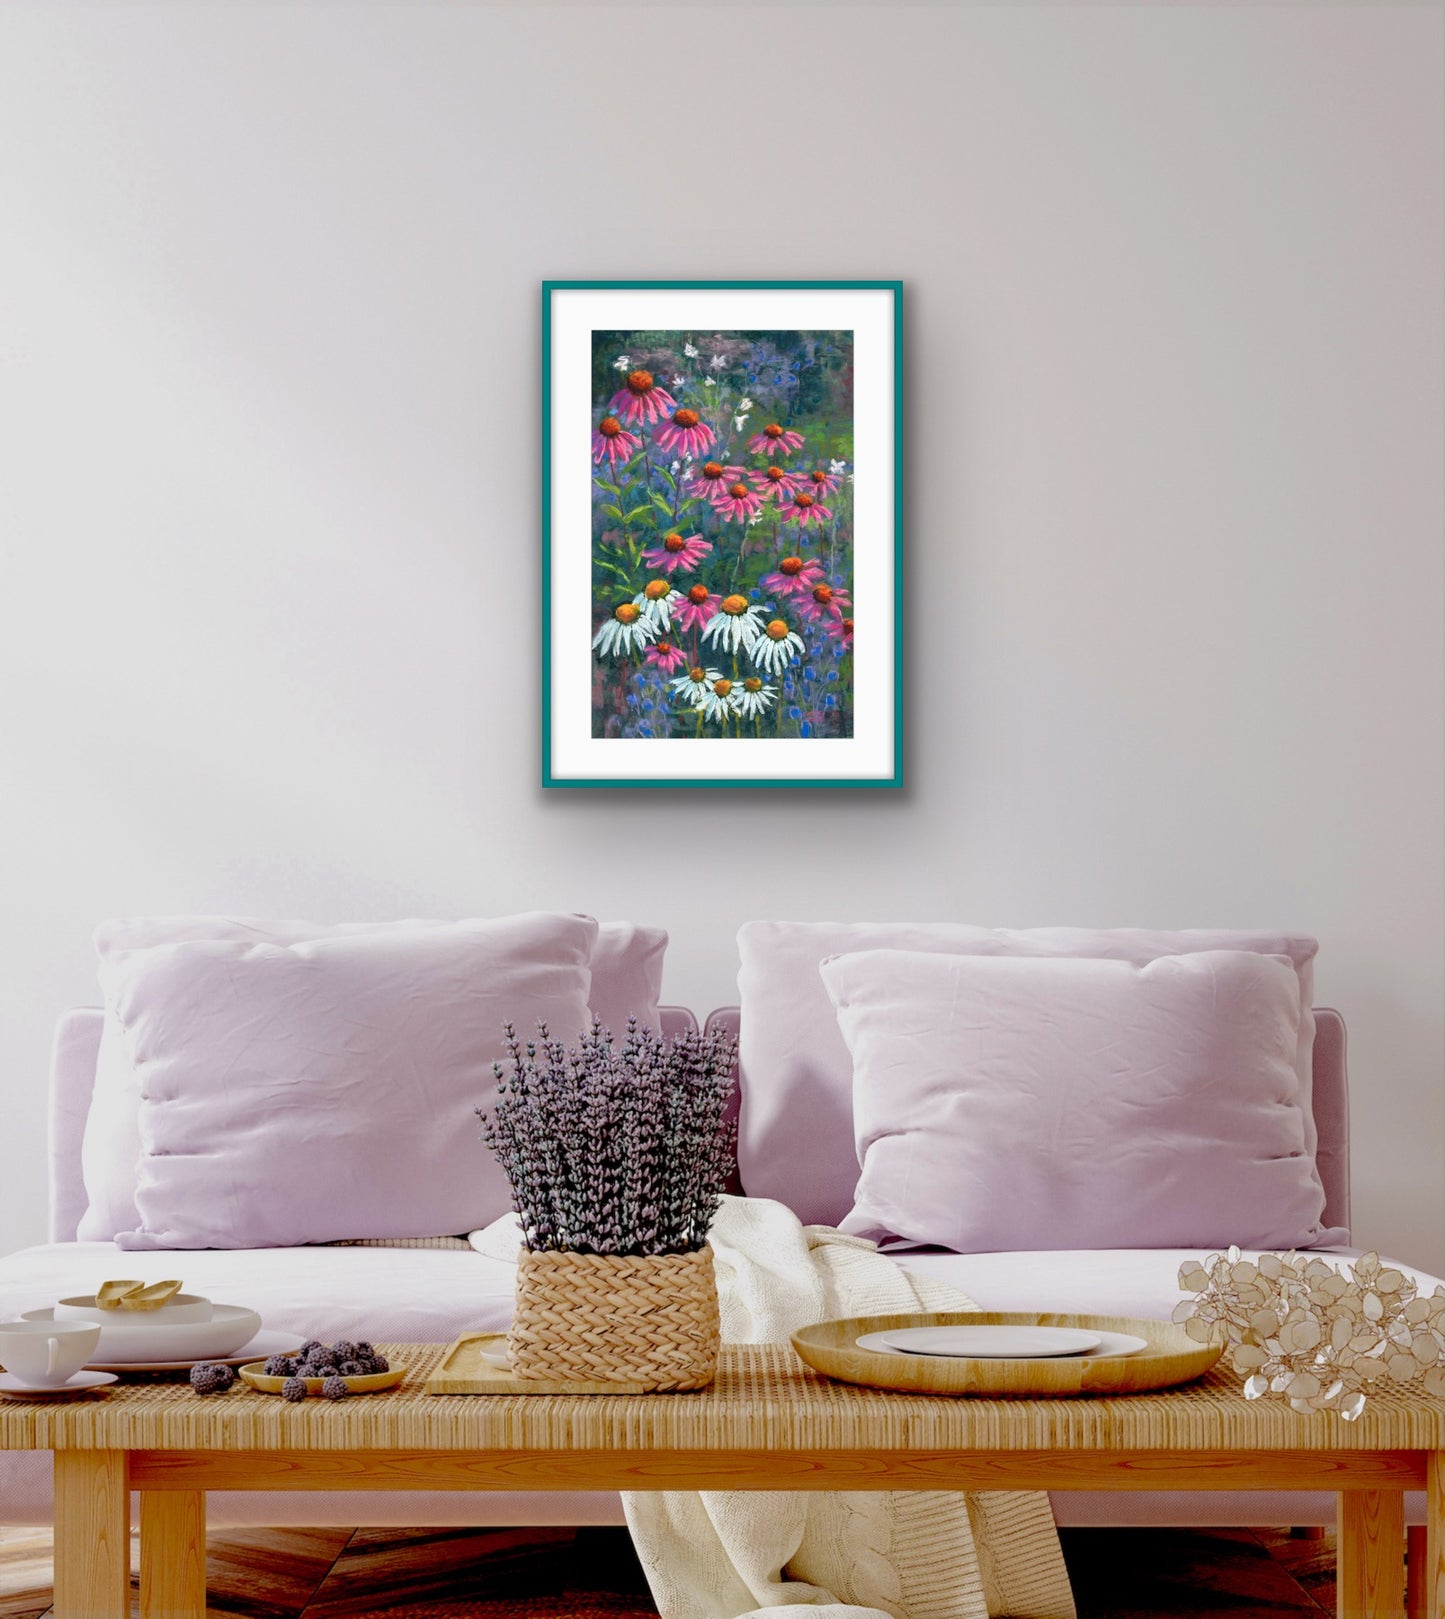 Echinaceas and Daisies, Fine Art Giclee Limited Edition Print